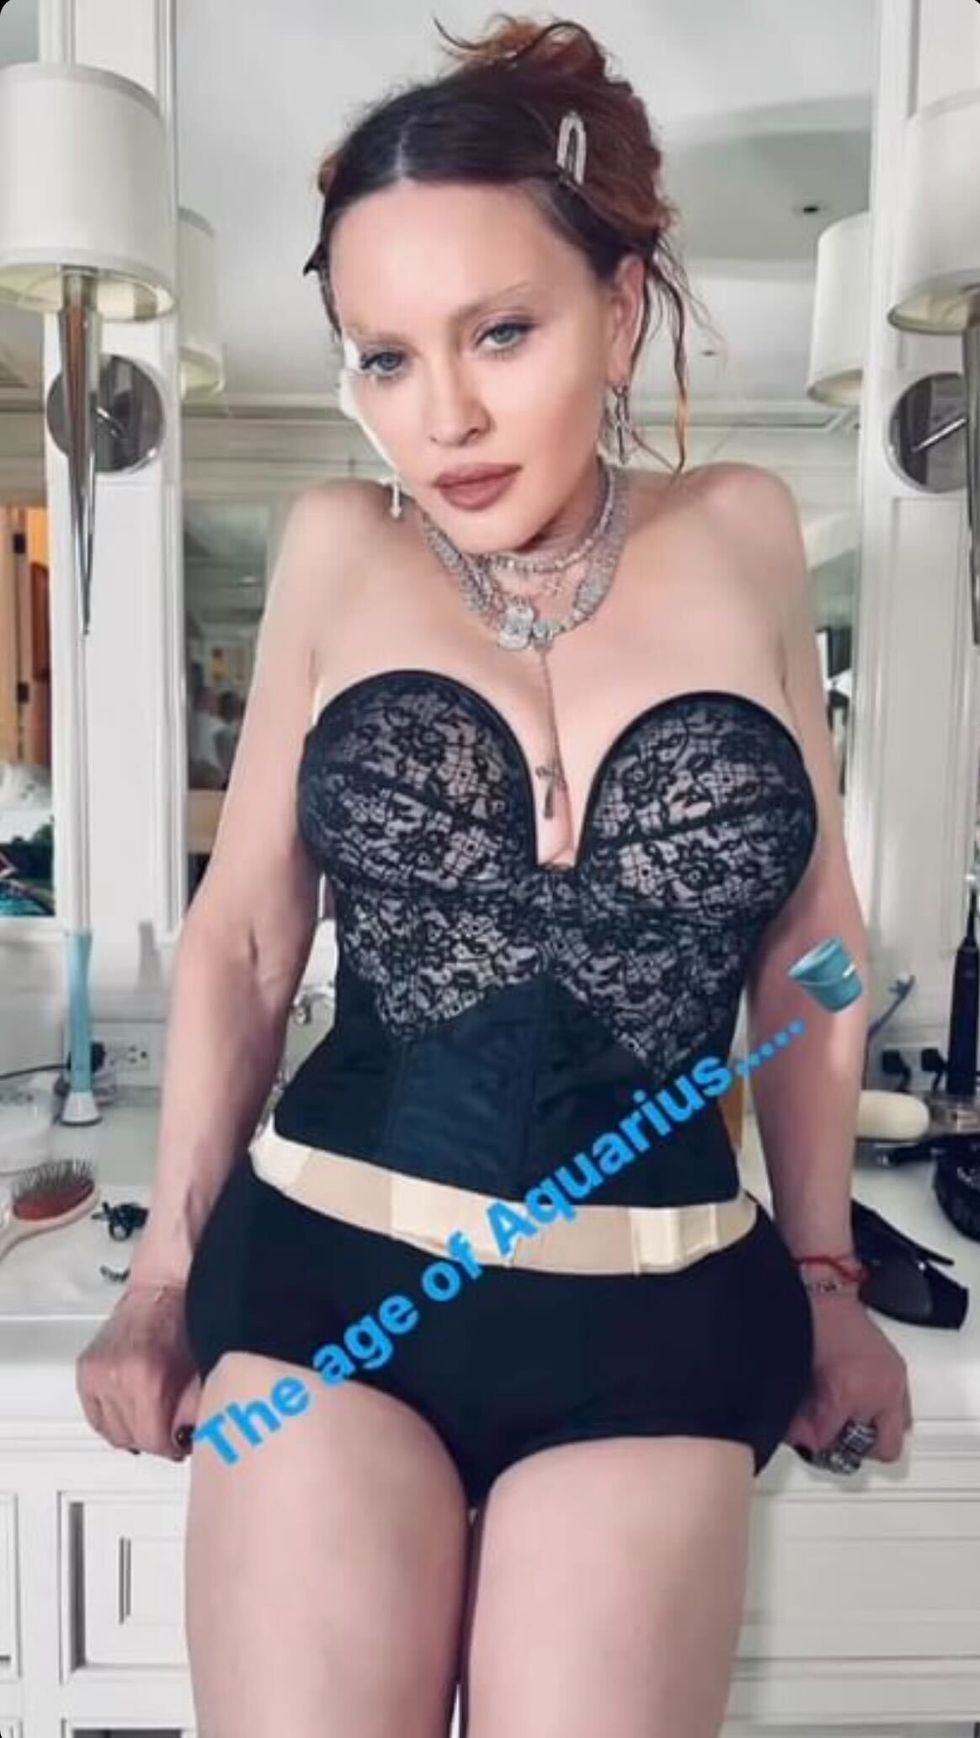 Madonna Slays With Toned AF Arms And Legs In A Revealing Corset On IG 👀